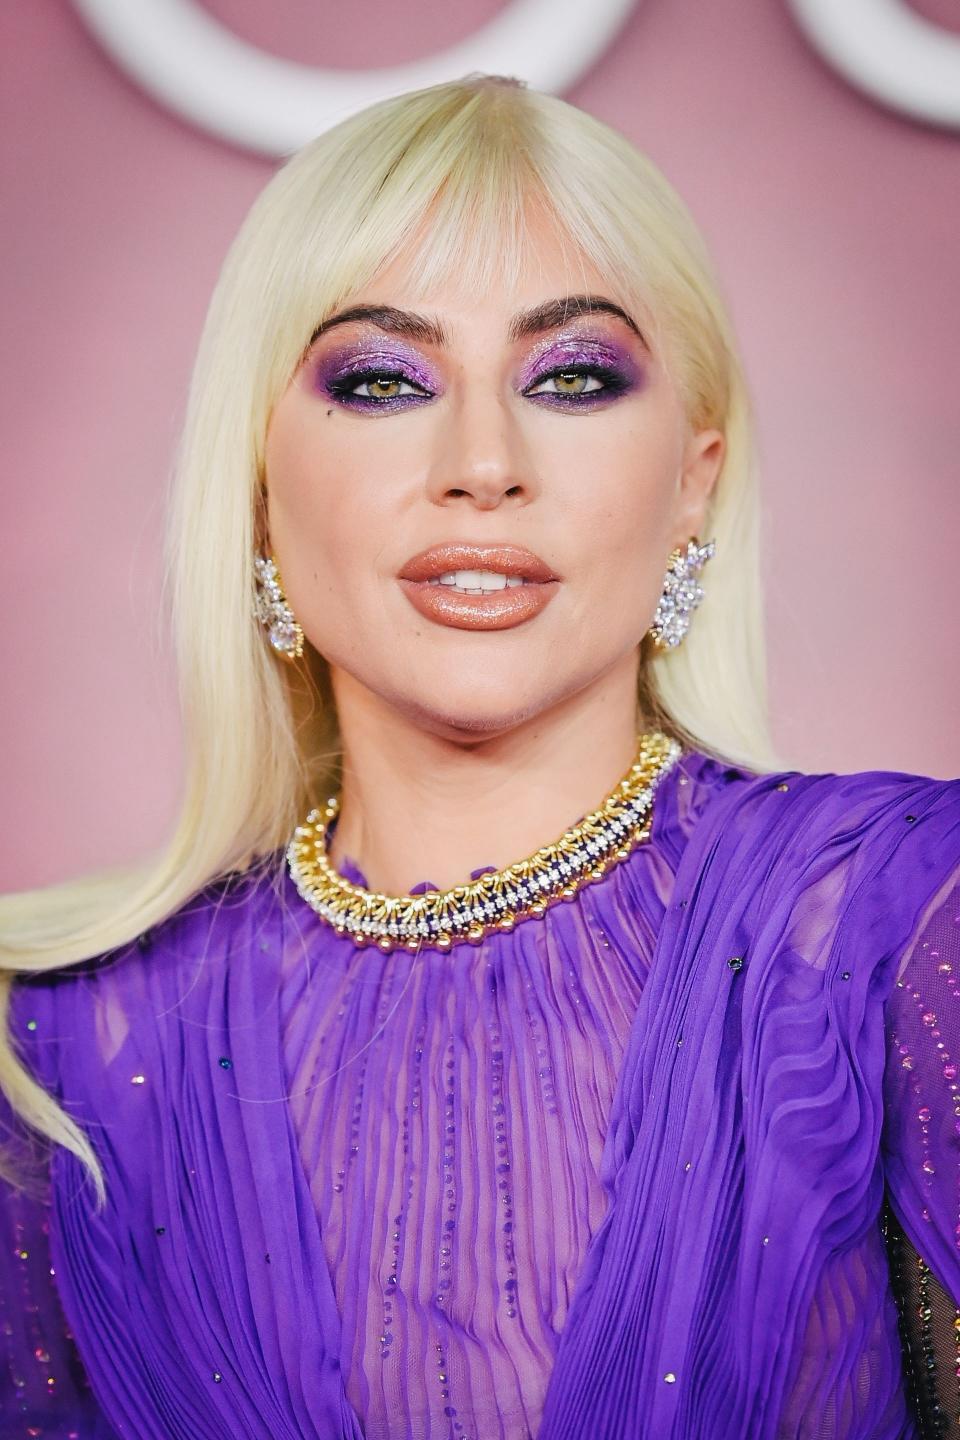 A close-up of Gaga's makeup, in which she has purple shimmer eyeshadow and a peach lip